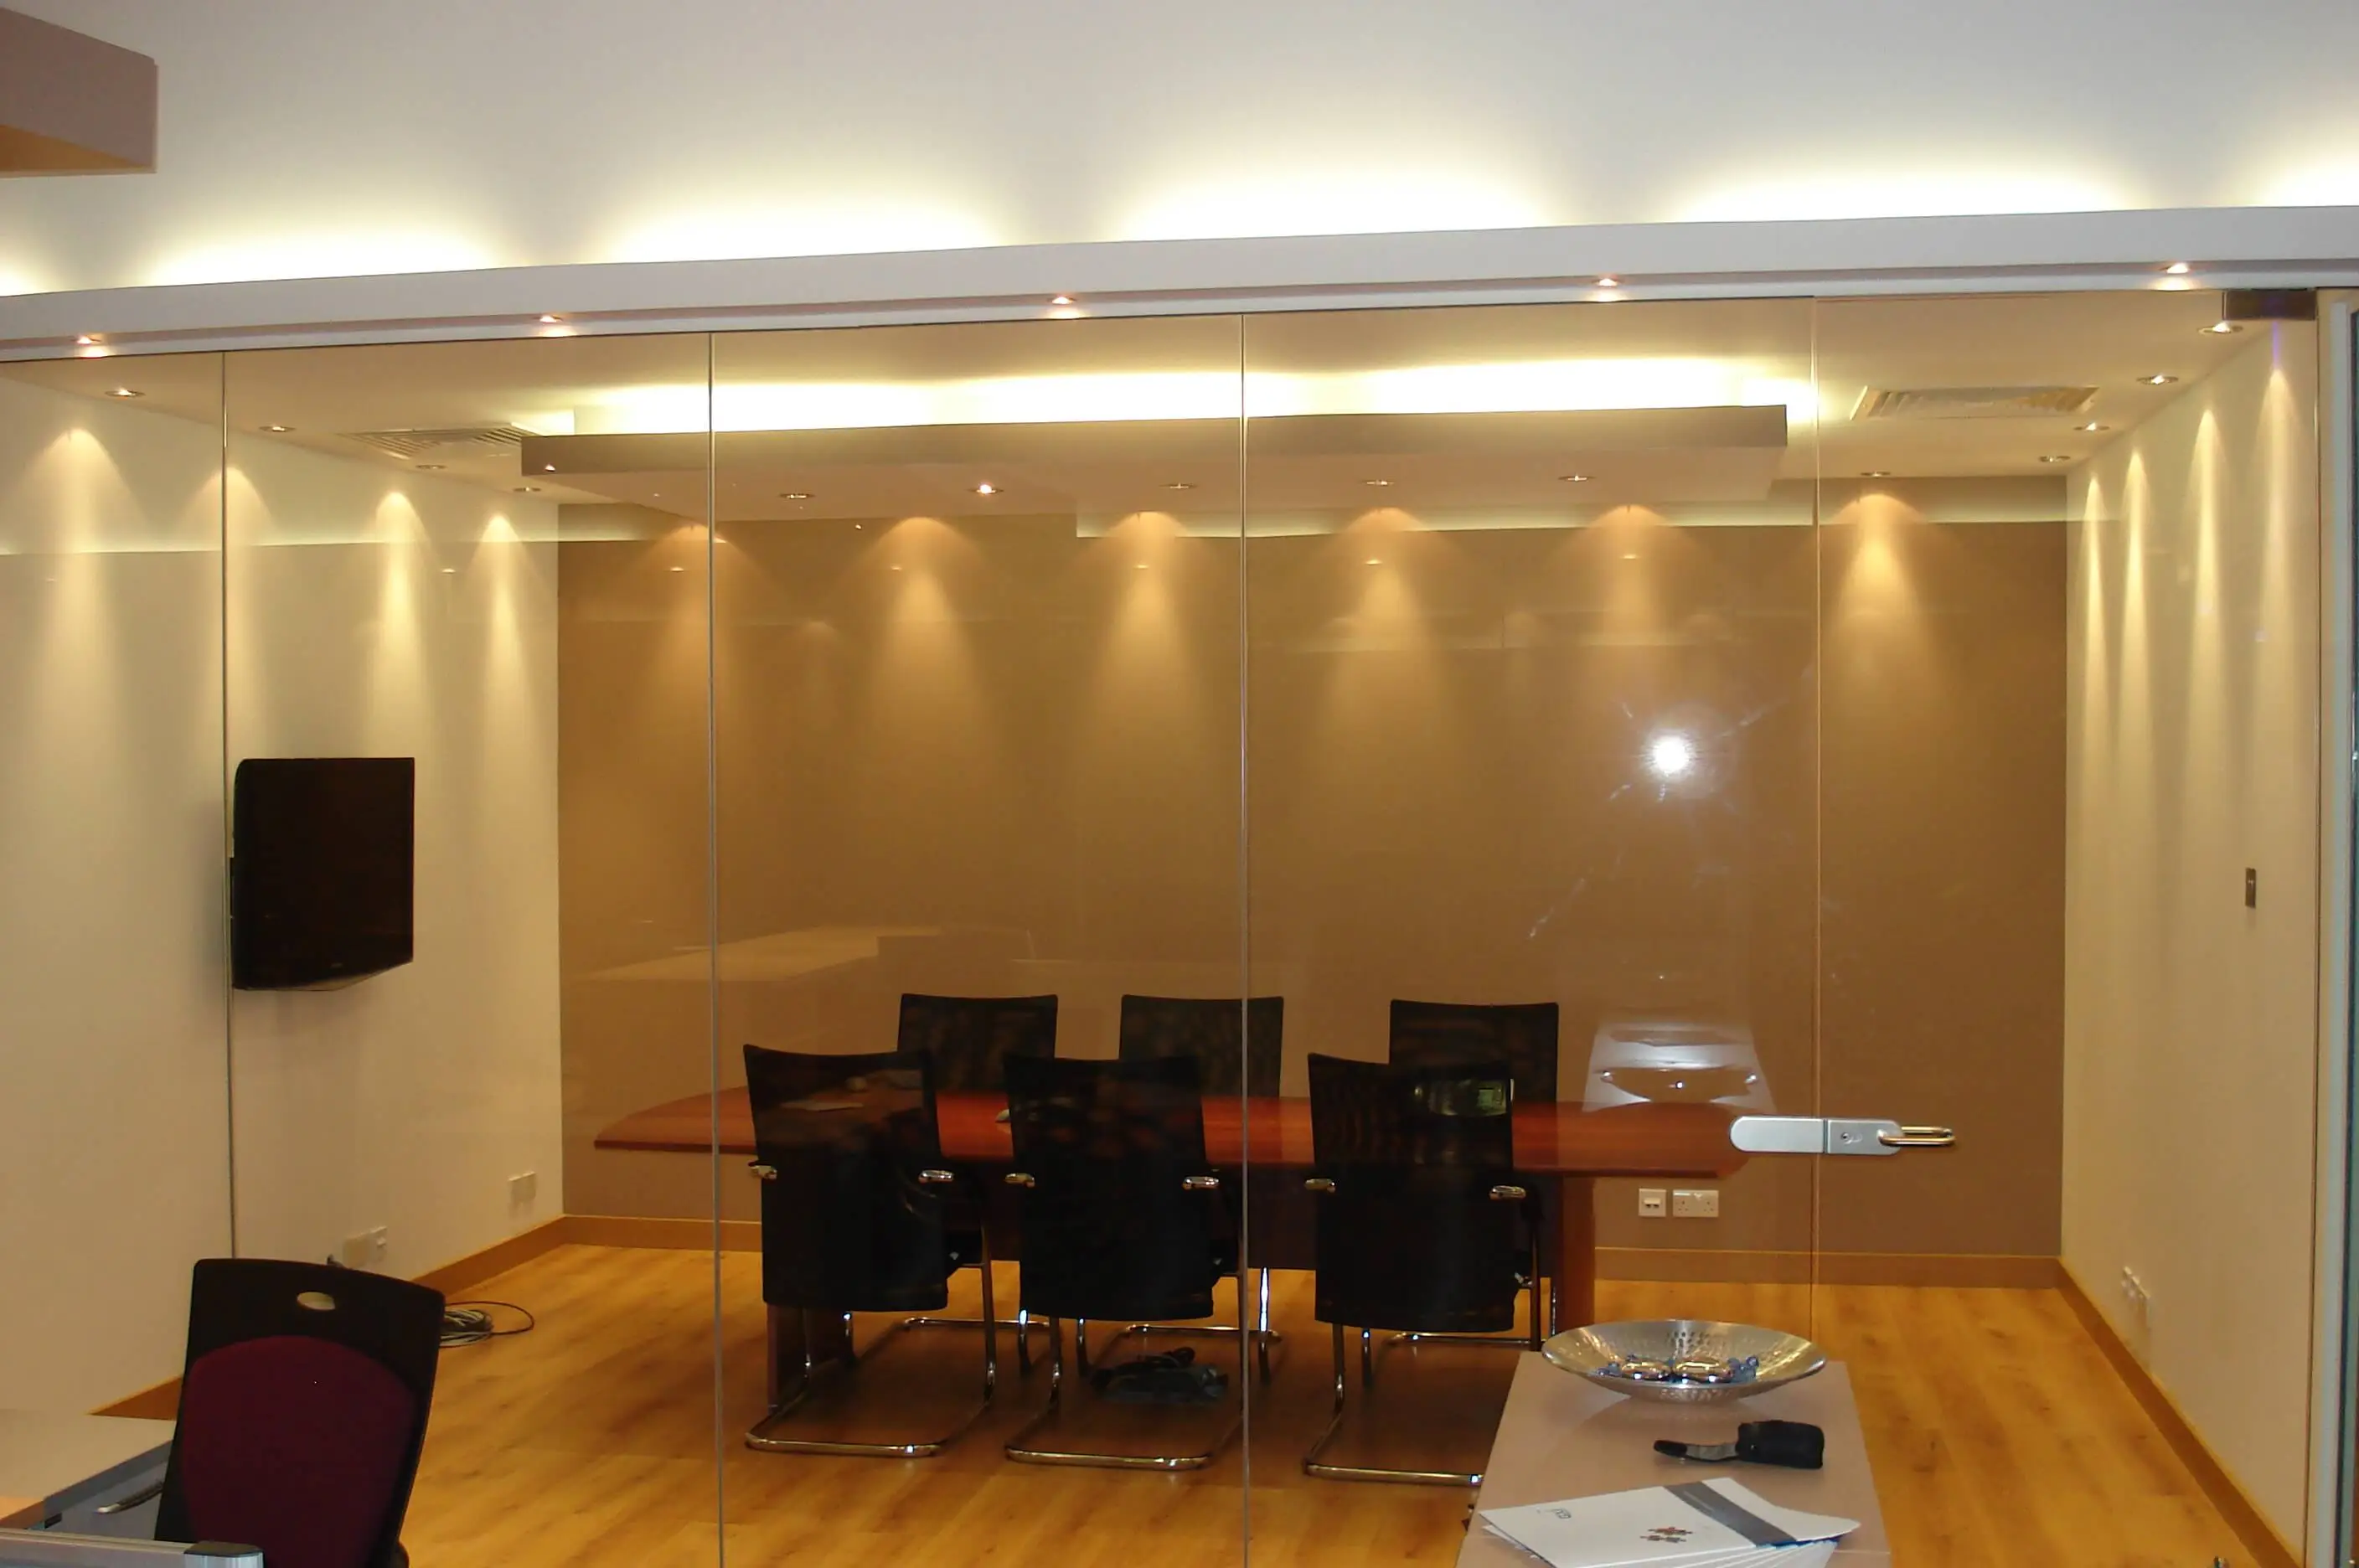 Meeting area with glass partitions and lighting